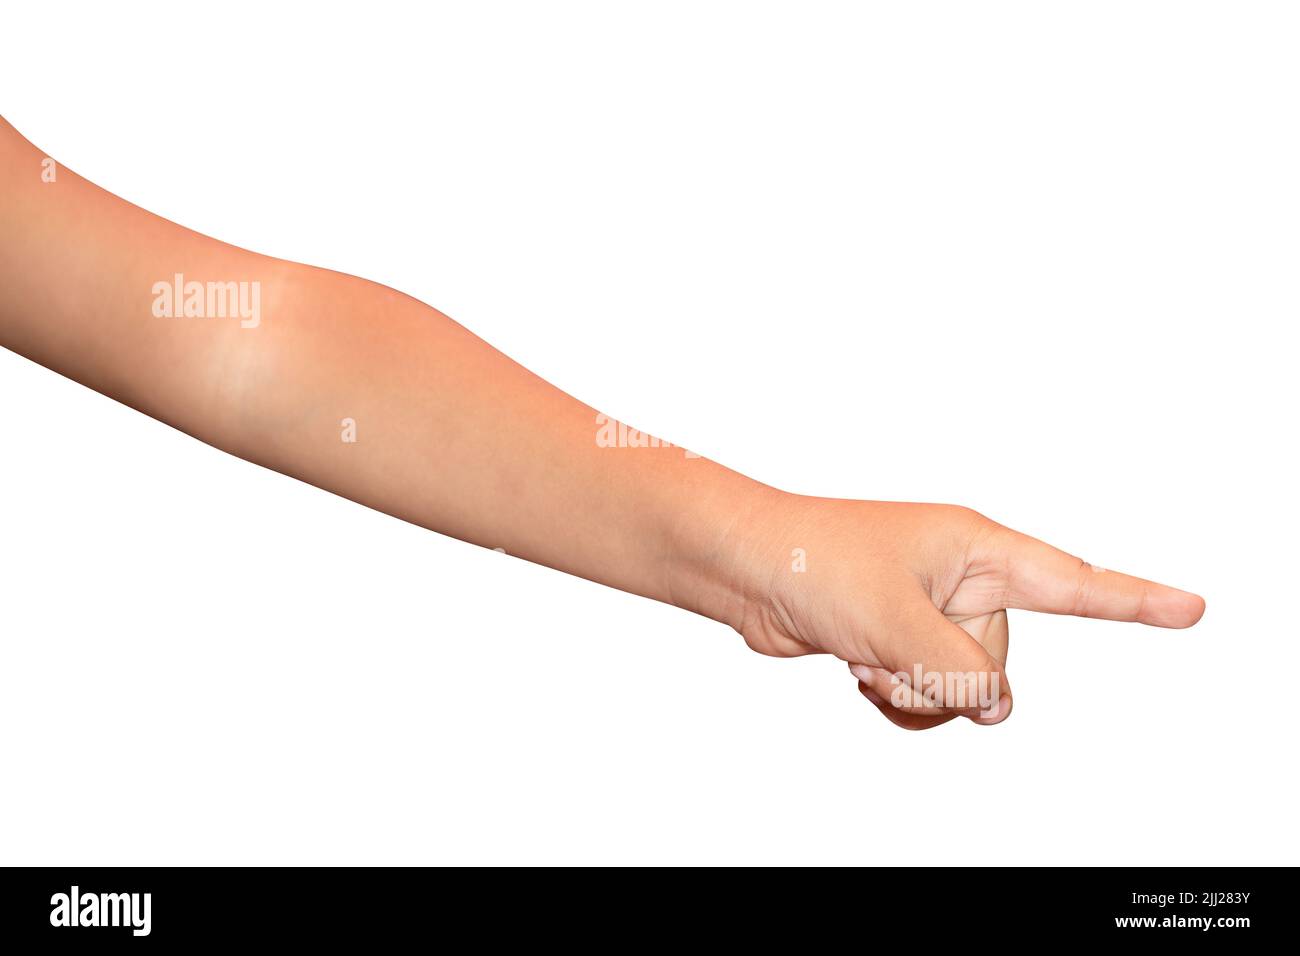 symbols of hand,hend different indications image Stock Photo